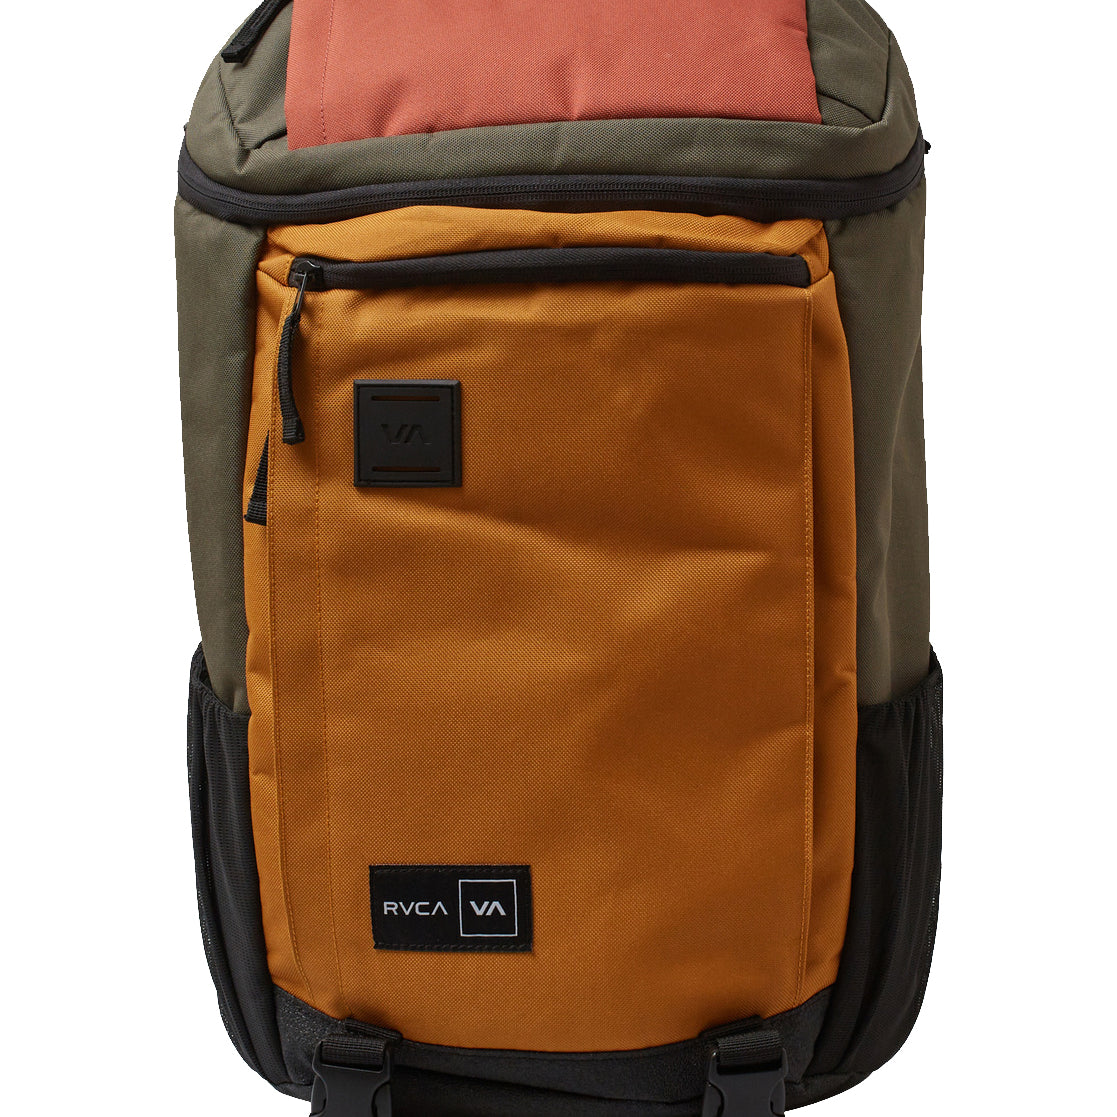 RVCA VOYAGE BACKPACK IV SQO-Sequoia 1SZ